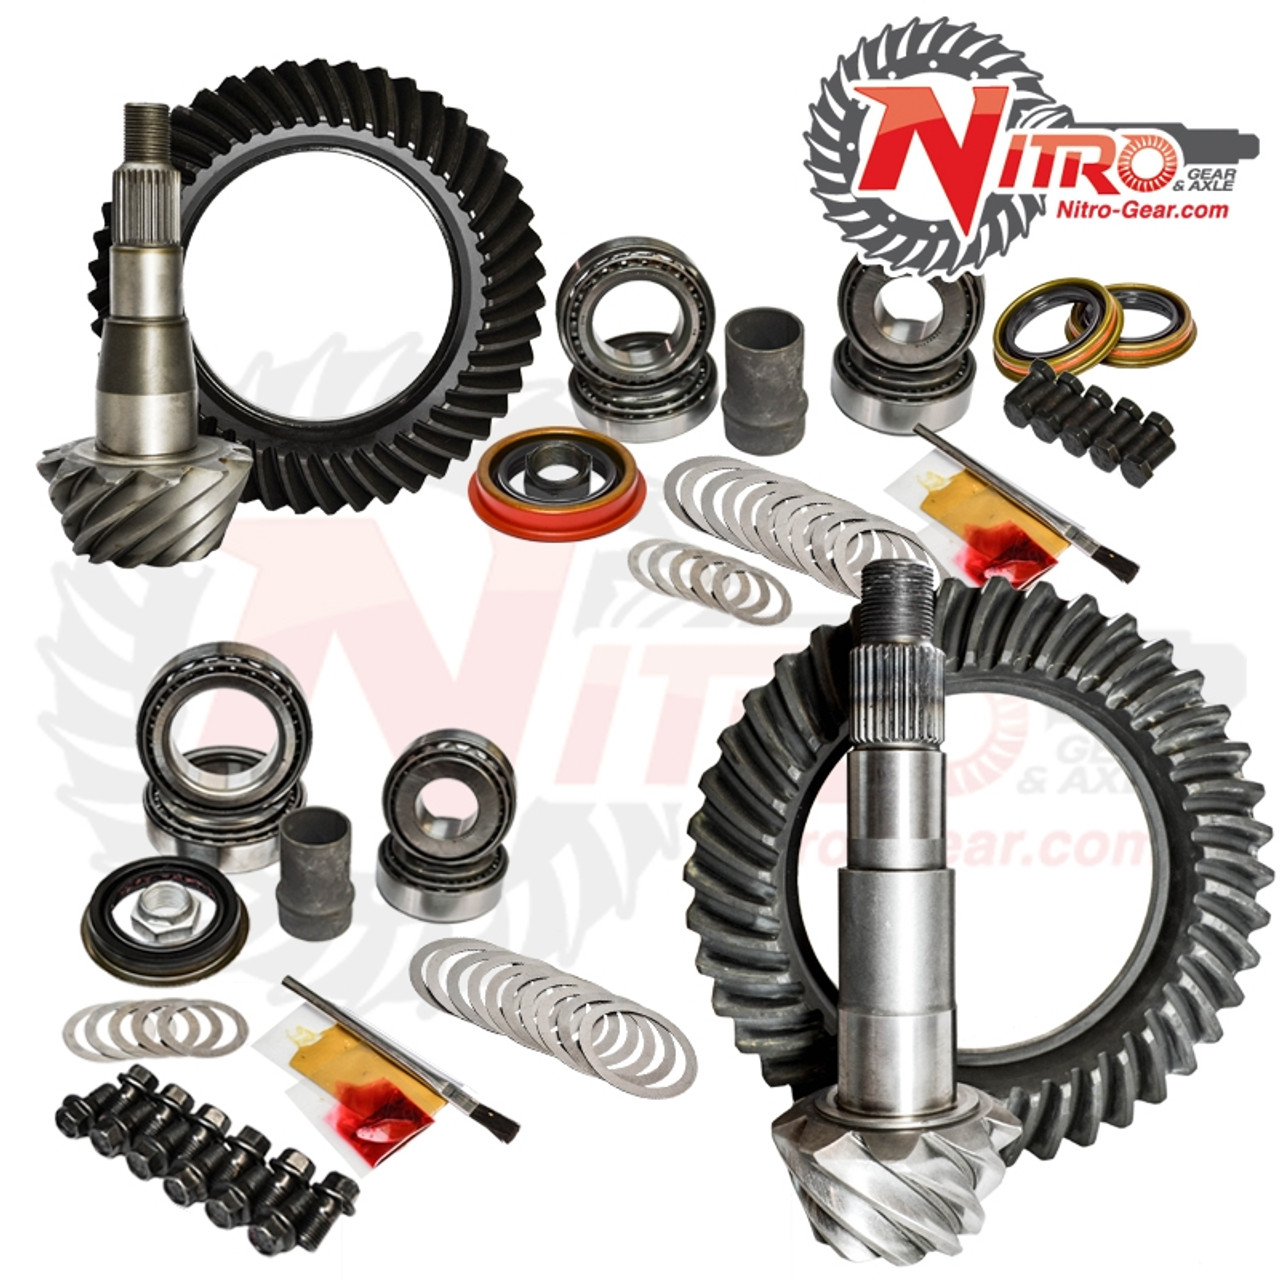 11-Newer Ford F-150 5.13 Ratio Gear Package Kit Nitro Gear and Axle